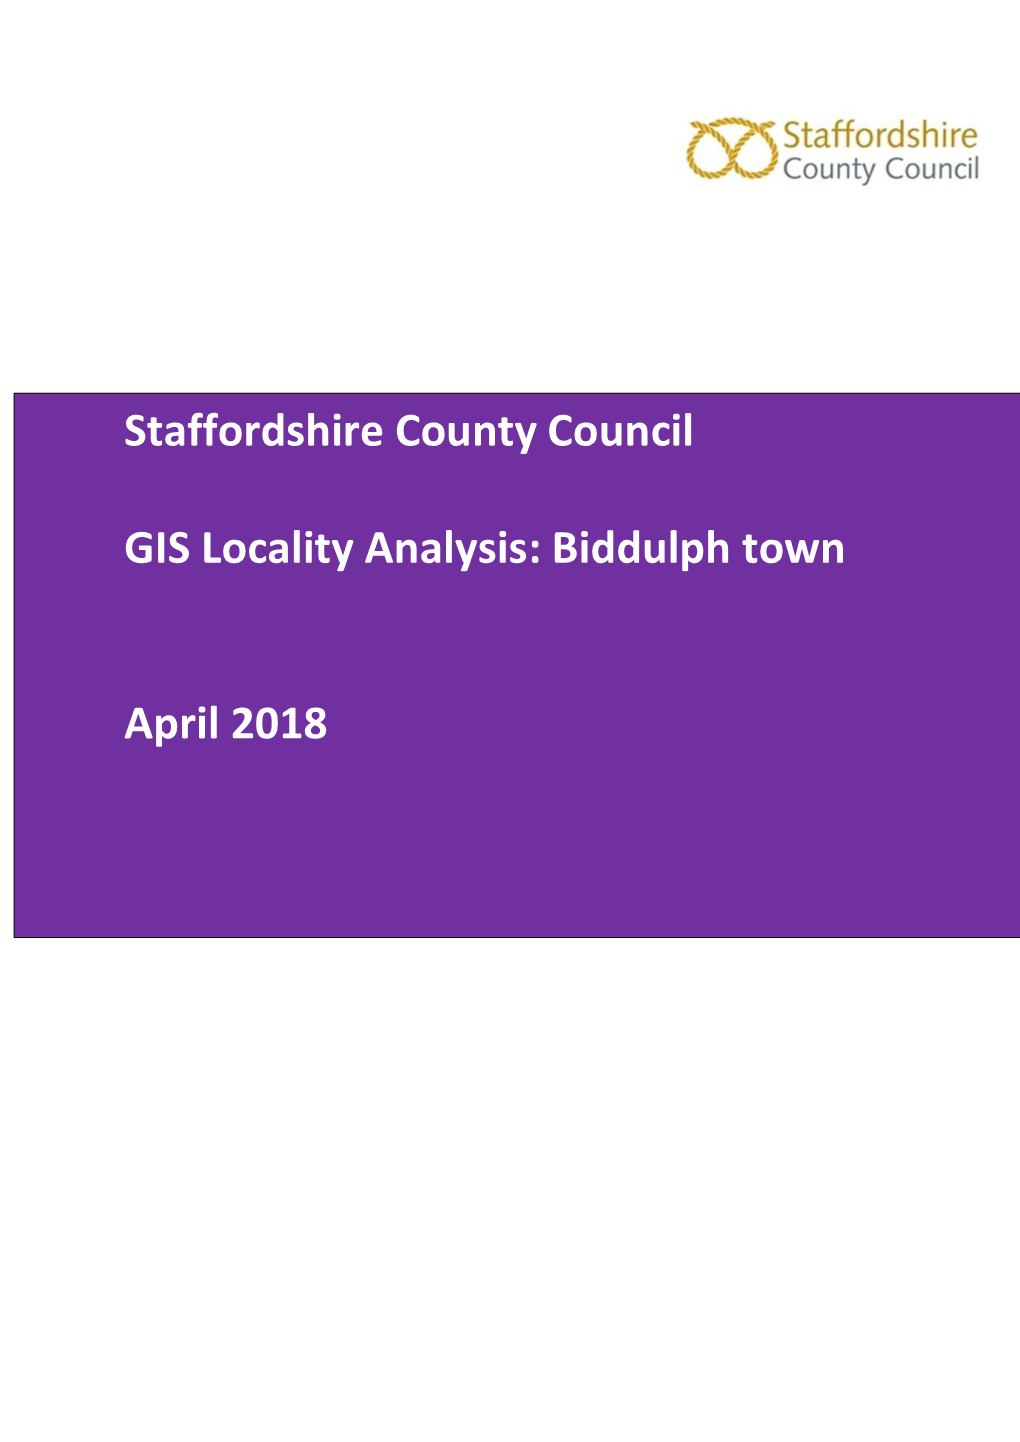 Staffordshire County Council GIS Locality Analysis: Biddulph Town April 2018 March 2018